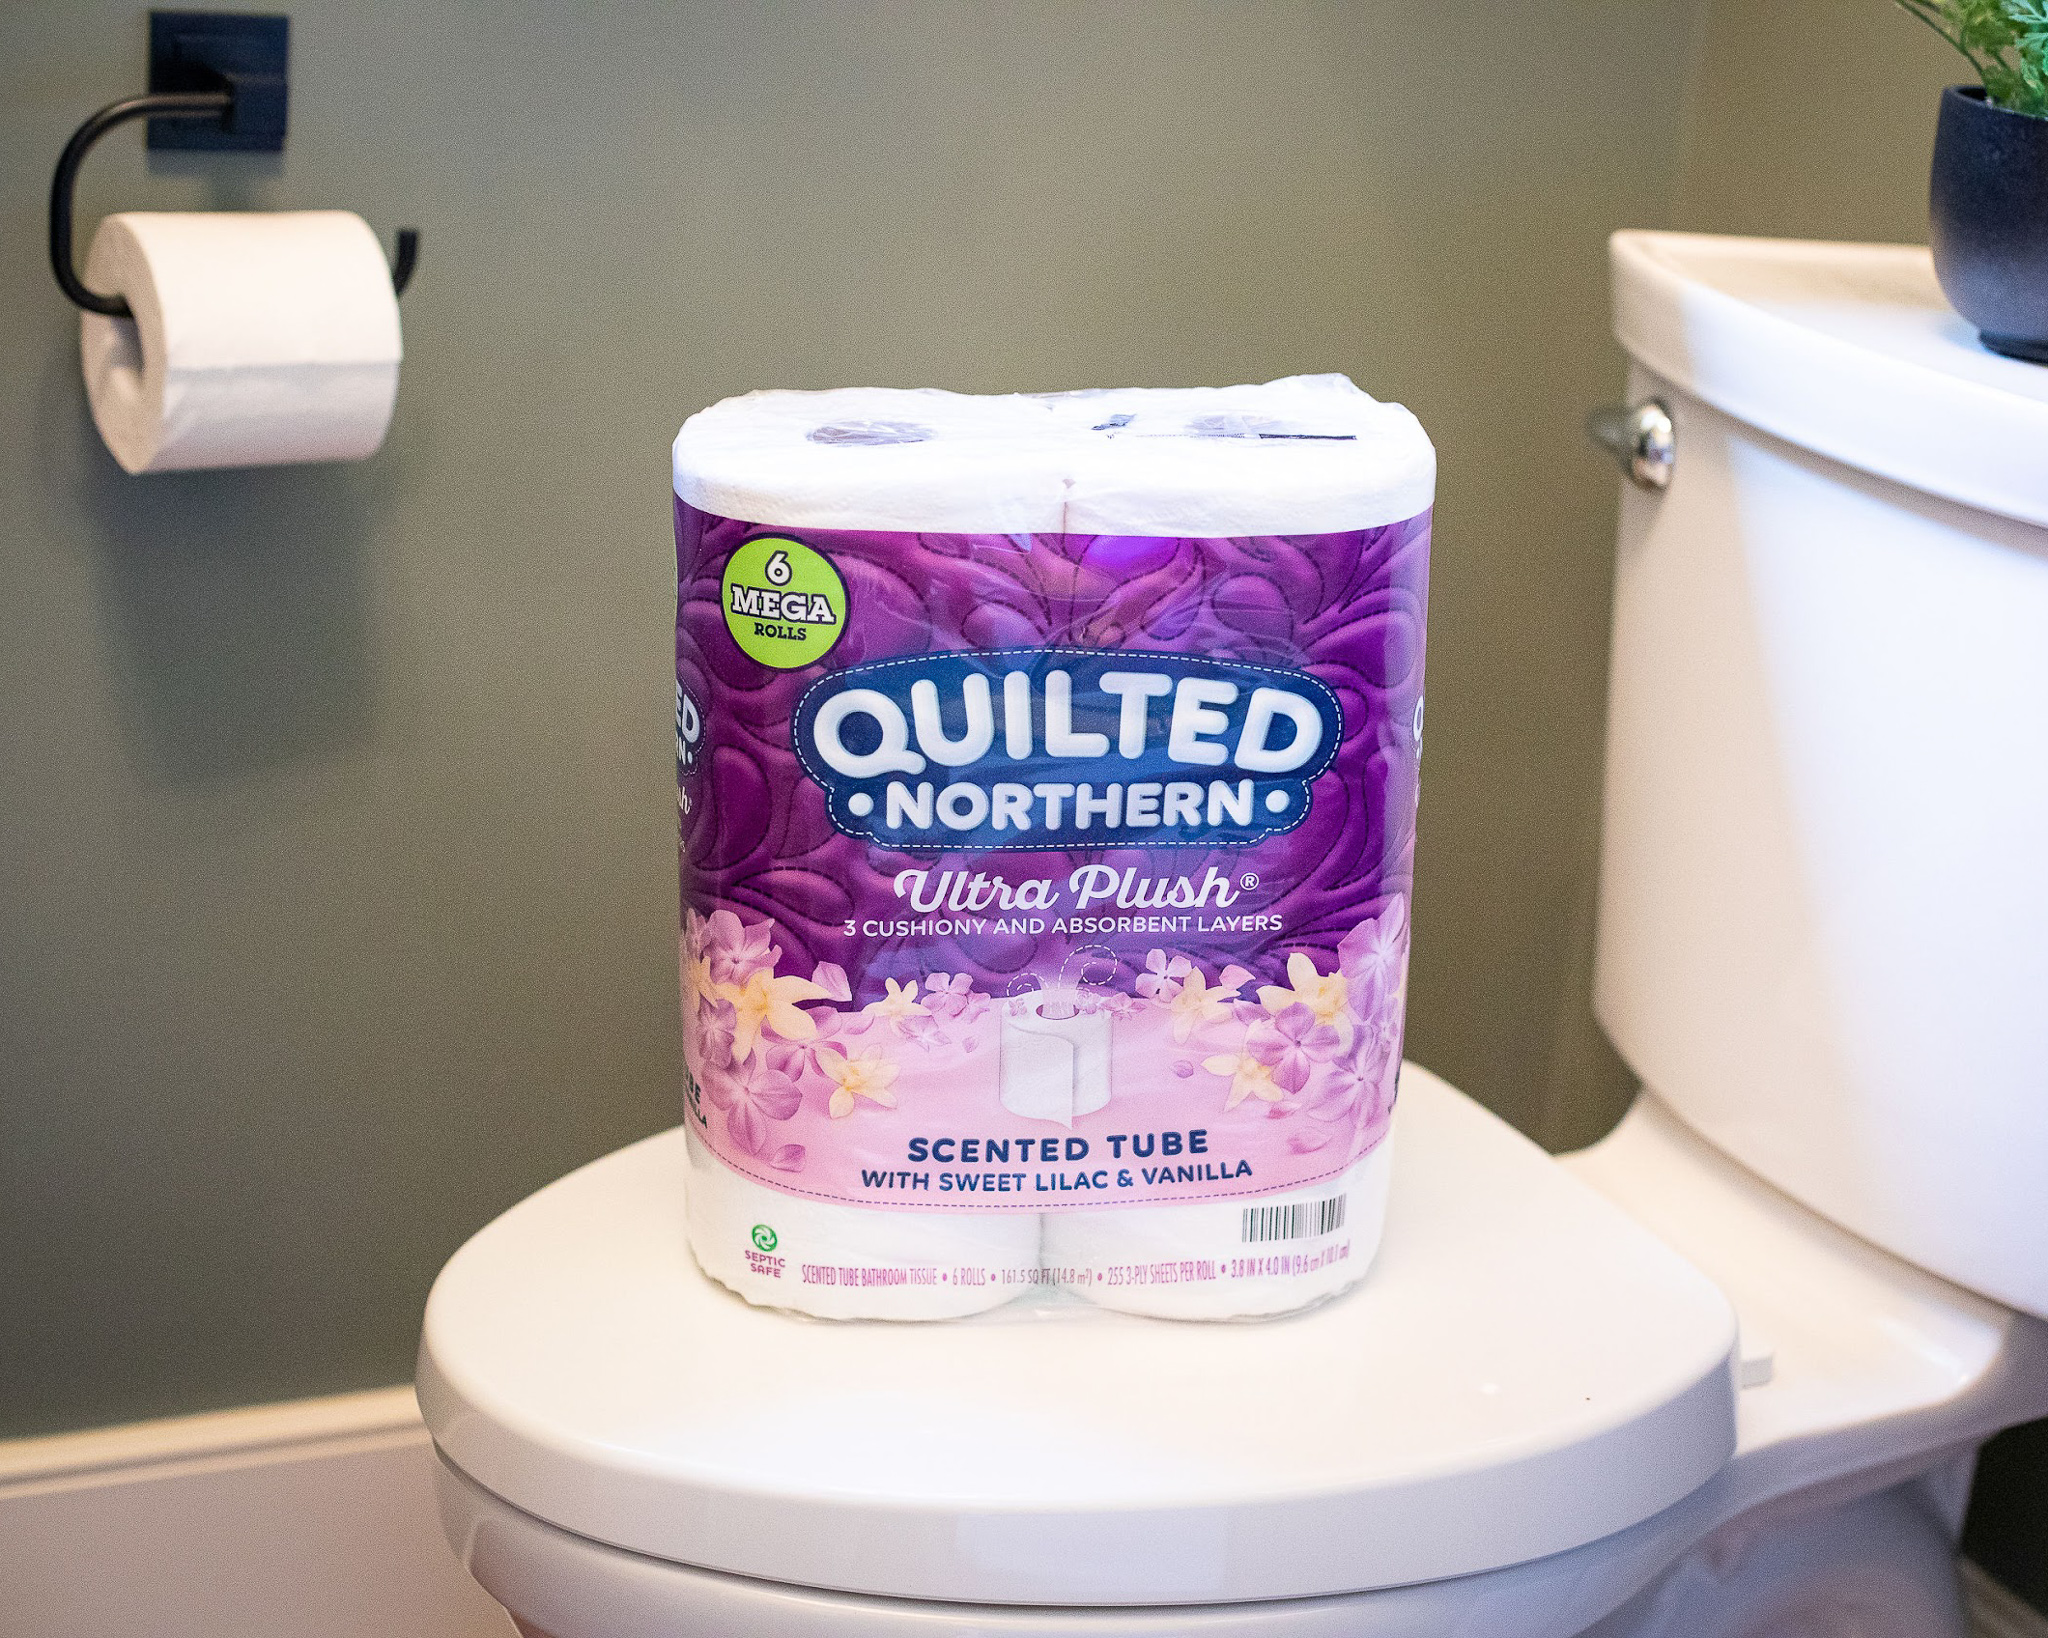 Quilted Northern Bathroom Tissue Just $5.99 At Publix (Regular Price $9.99)